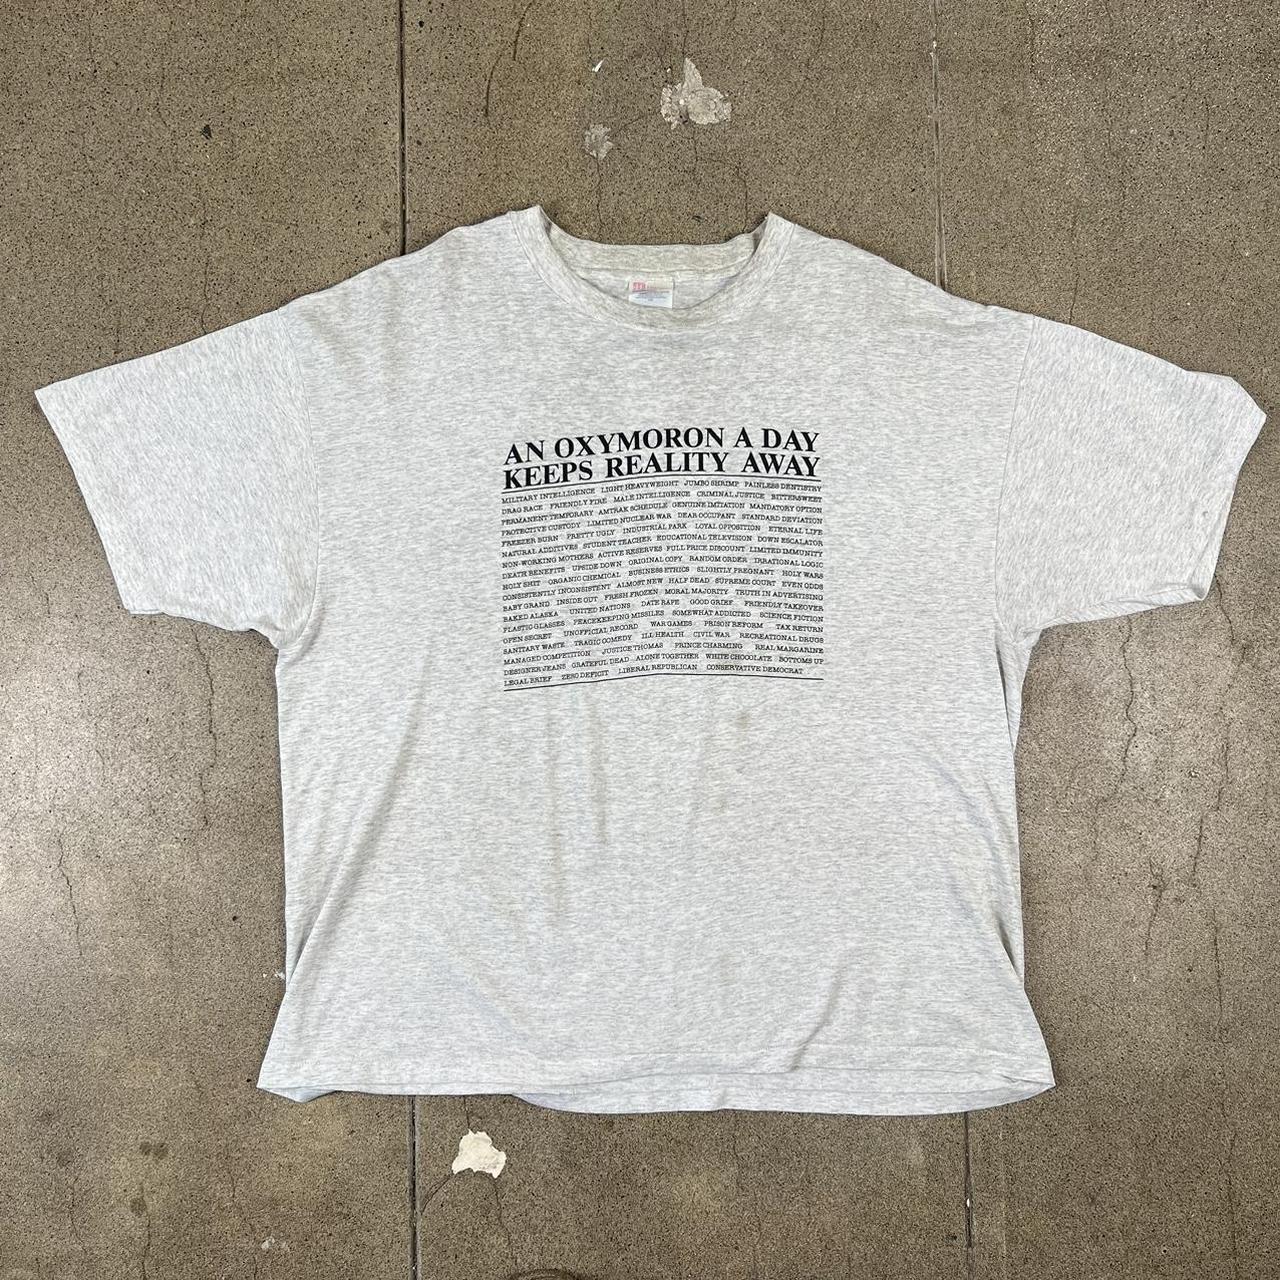 90s oxymoron shirt. Has some staining but still fire - Depop